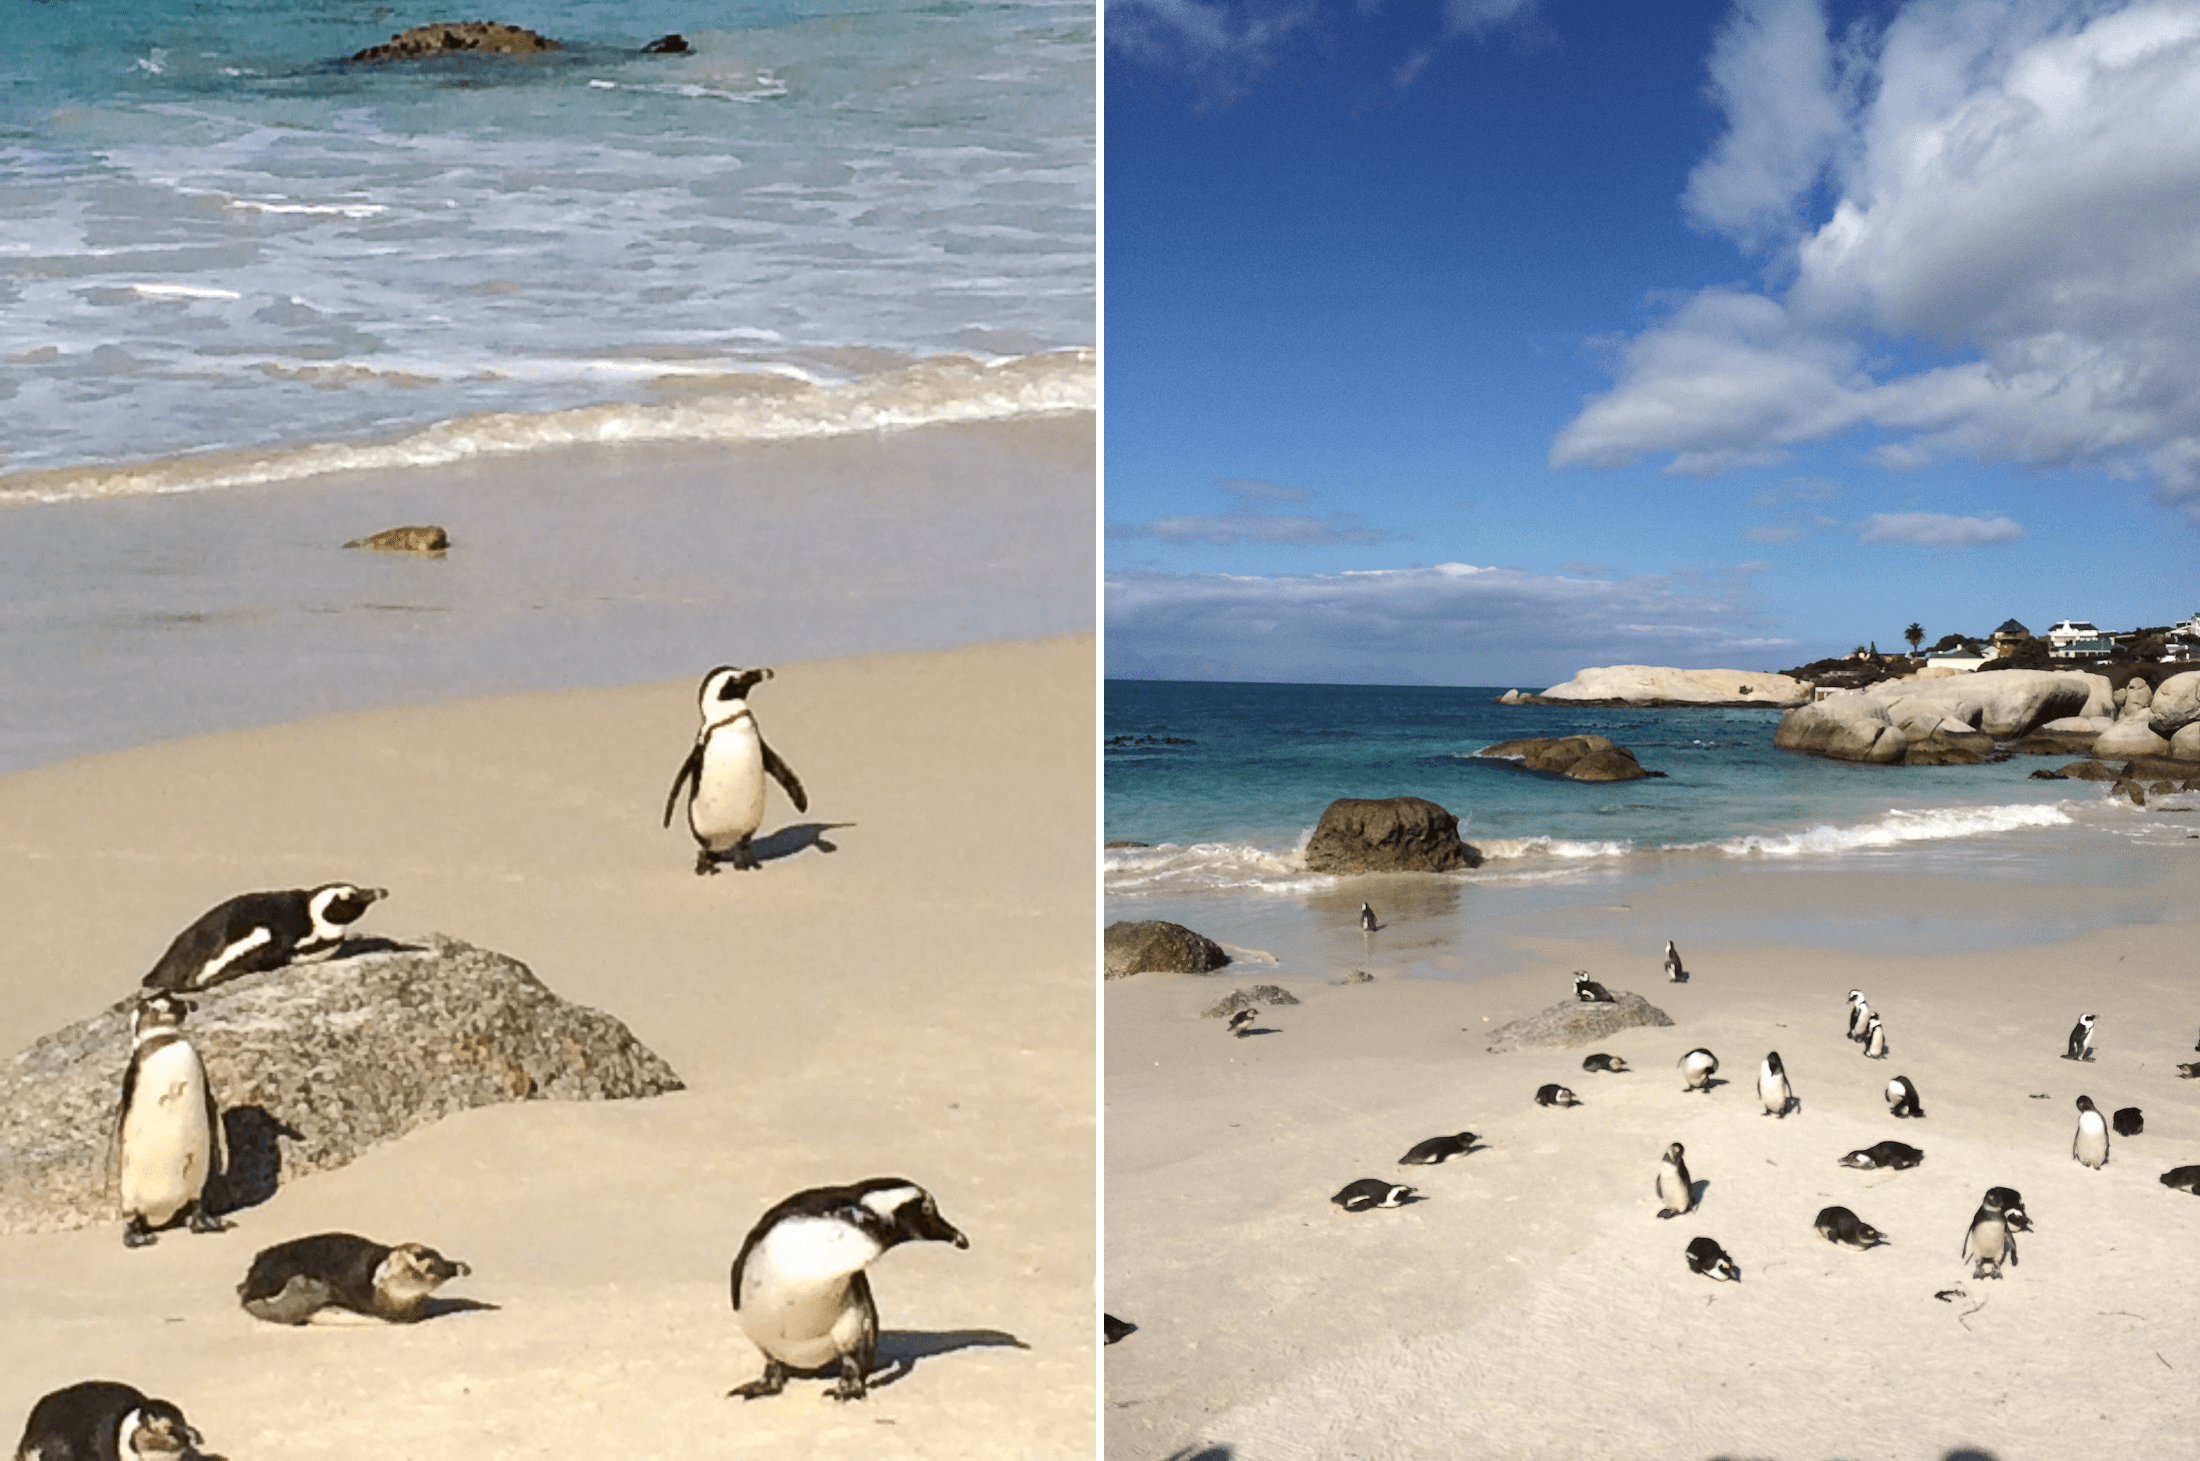 south africa cape town travel guide boulder beach penguin sanctuary sher she goes shershegoes.com (2)